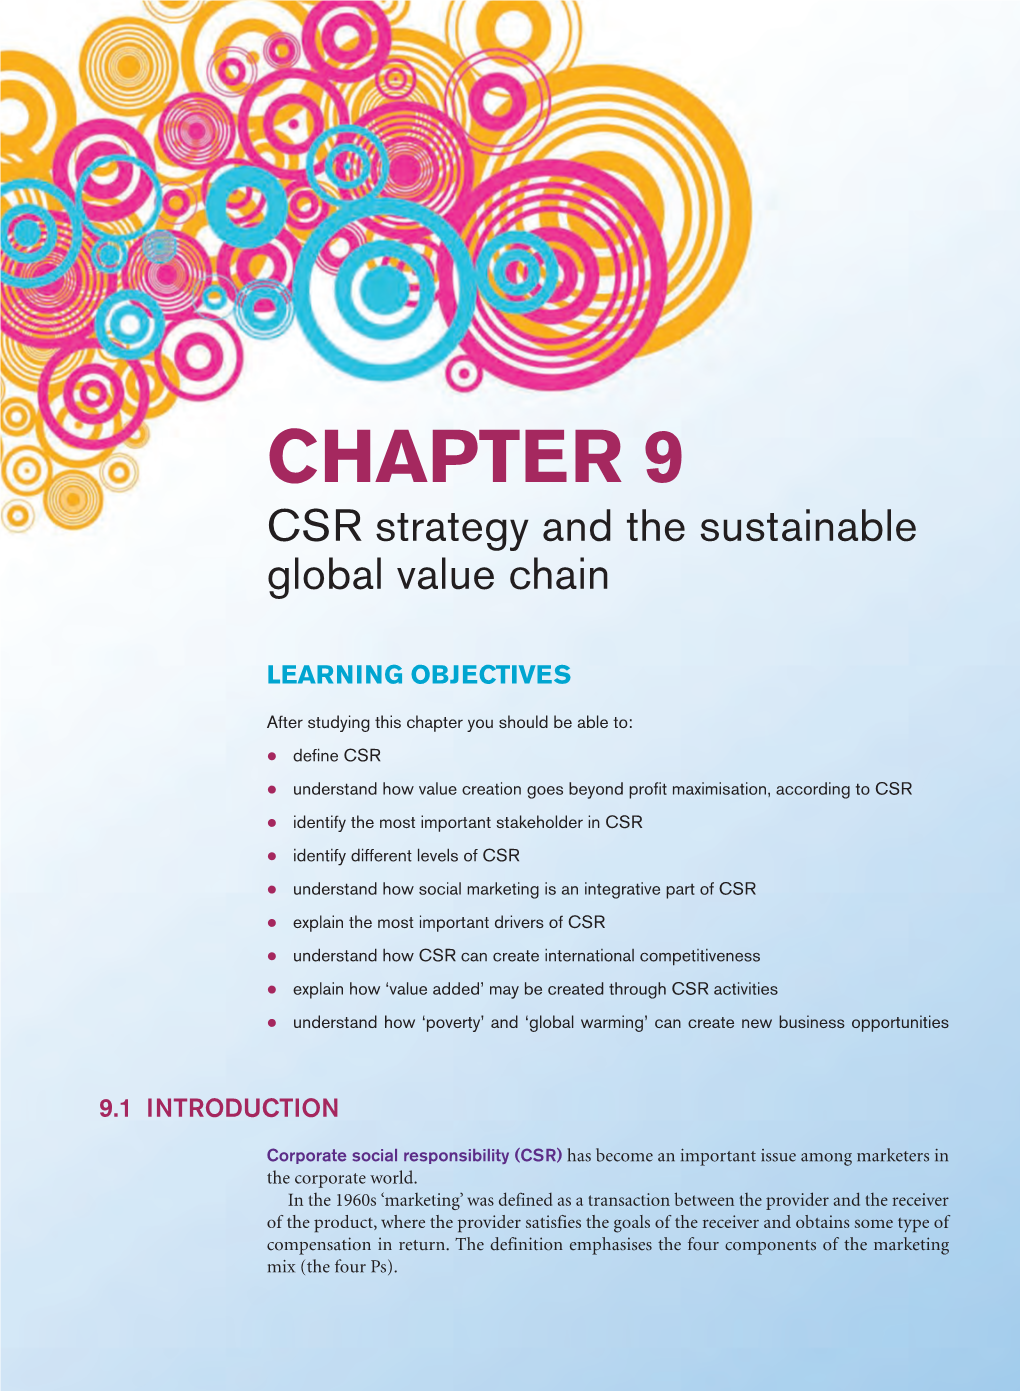 CHAPTER 9 CSR Strategy and the Sustainable Global Value Chain